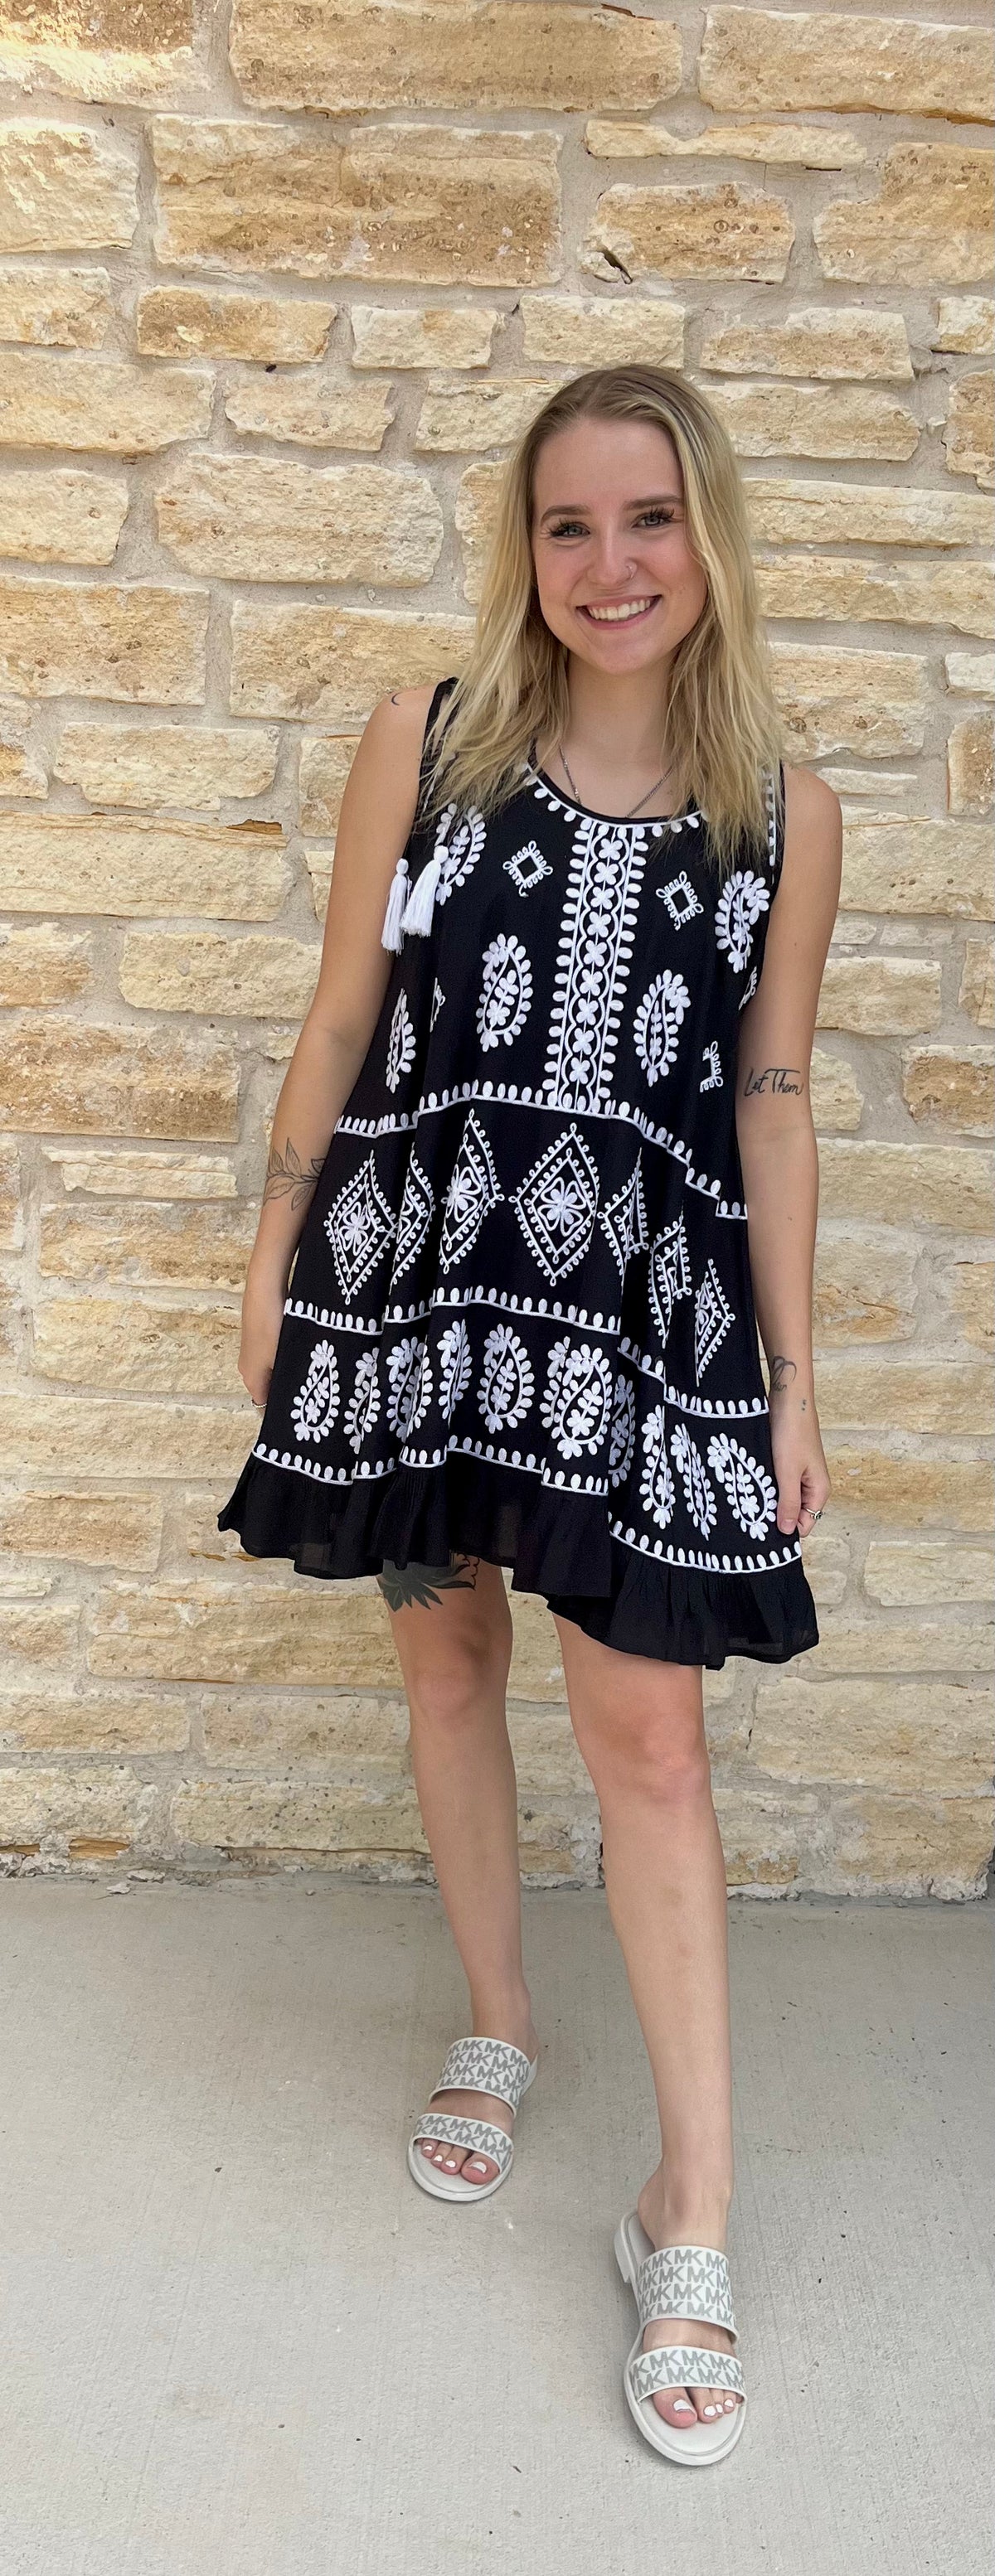 Blk/Wht Embroidered Dress